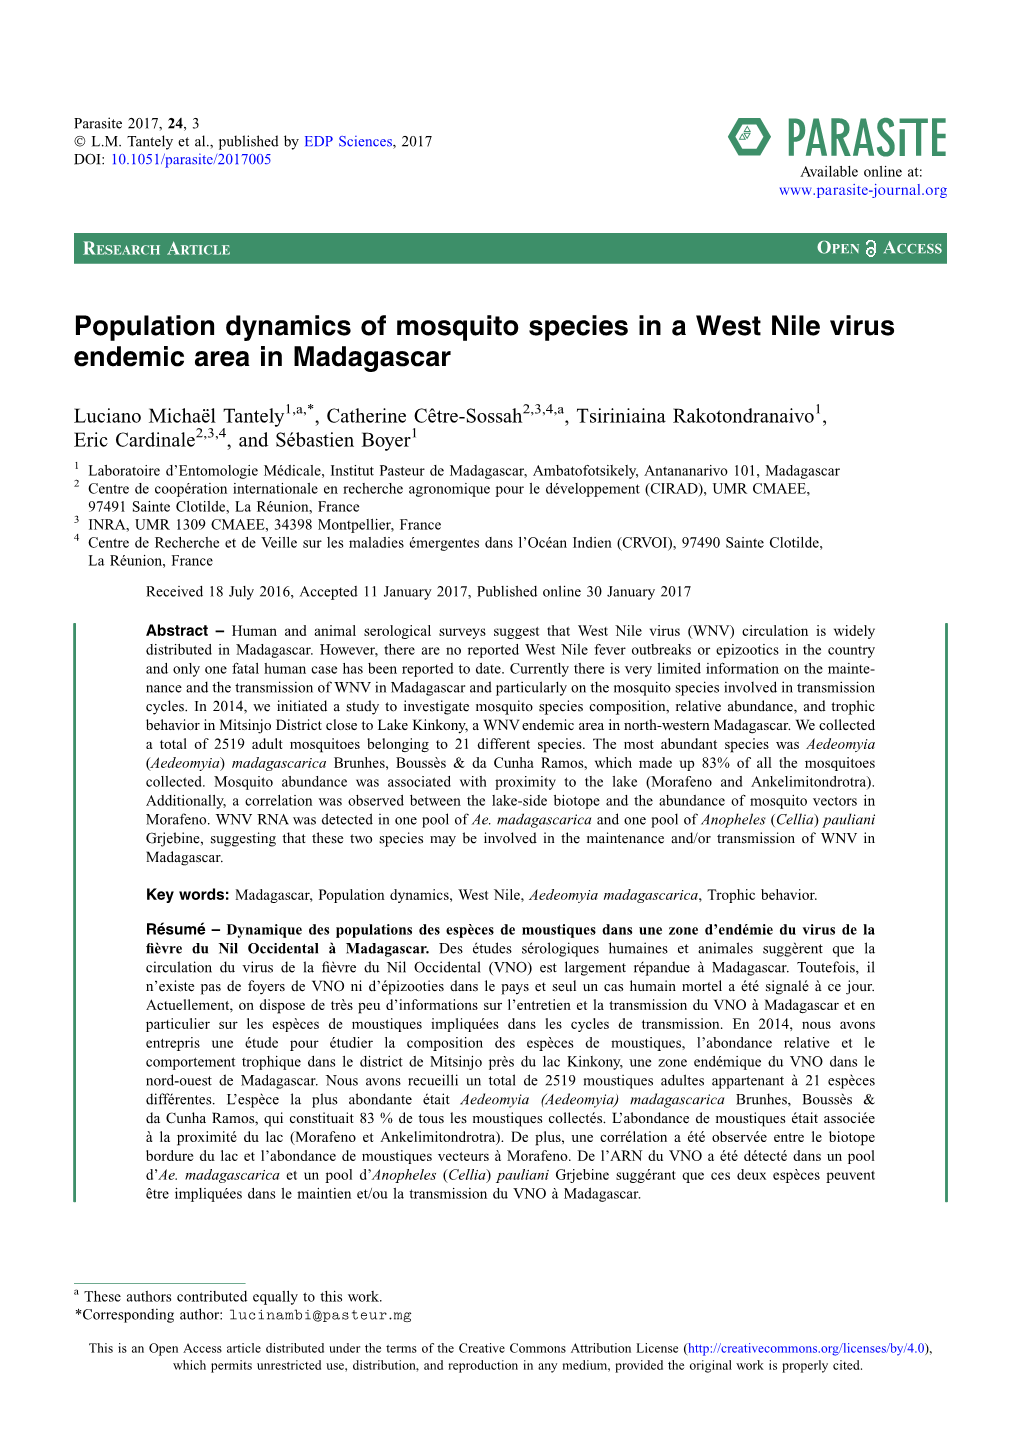 Population Dynamics of Mosquito Species in a West Nile Virus Endemic Area in Madagascar